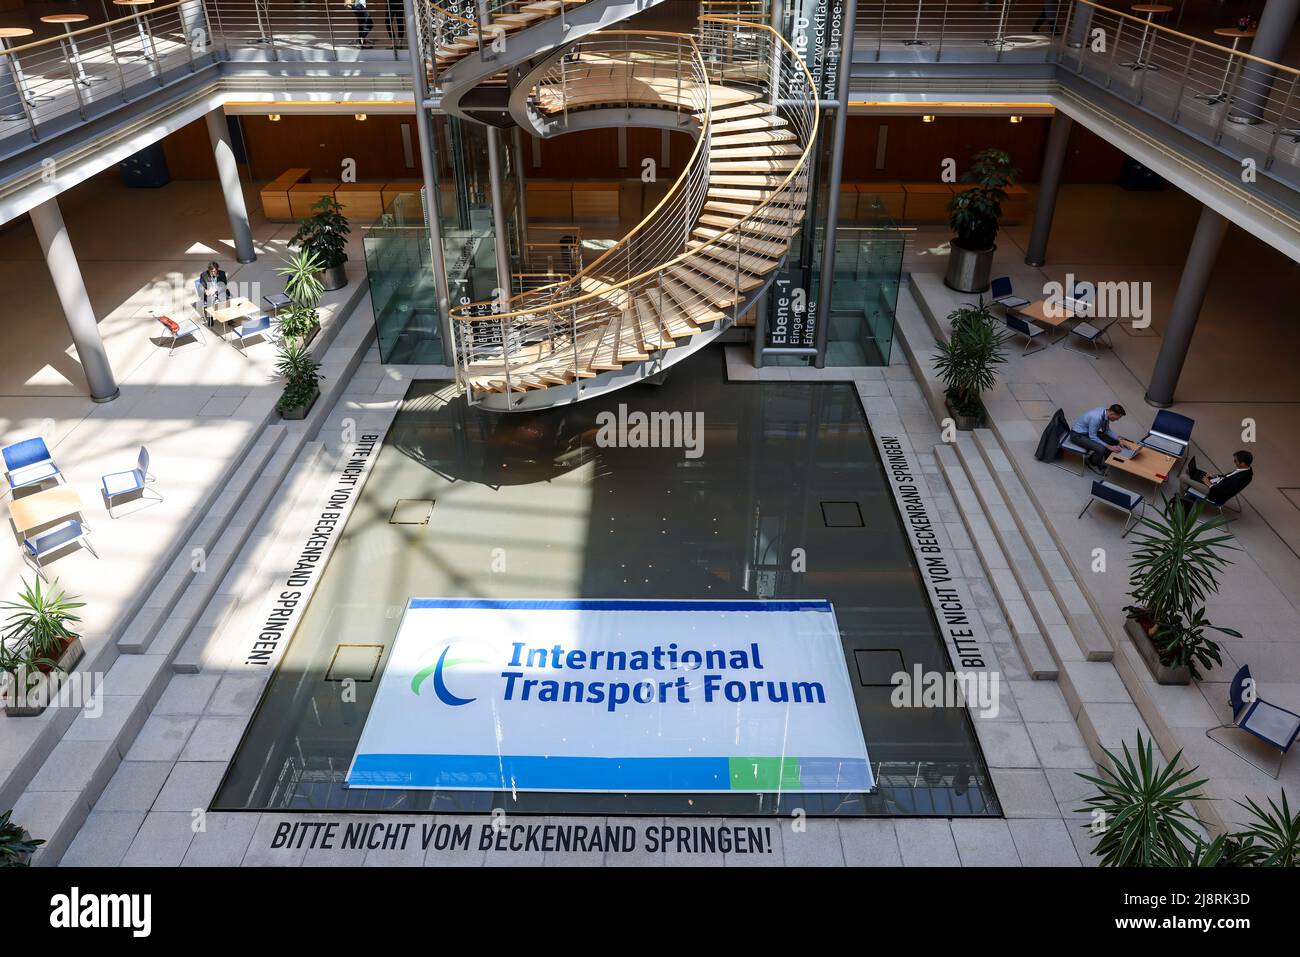 Leipzig, Germany. 18th May, 2022. The logo of the International Transport Forum is on display at the Congress Center Leipzig. Around 600 experts are expected to attend the three-day International Transport Forum, including numerous transport ministers from the 63 member states of the OECD's International Transport Forum (ITF). One focus this year should be Ukraine, with its blocked trade routes and infrastructure destroyed in the war. Credit: Jan Woitas/dpa/Alamy Live News Stock Photo